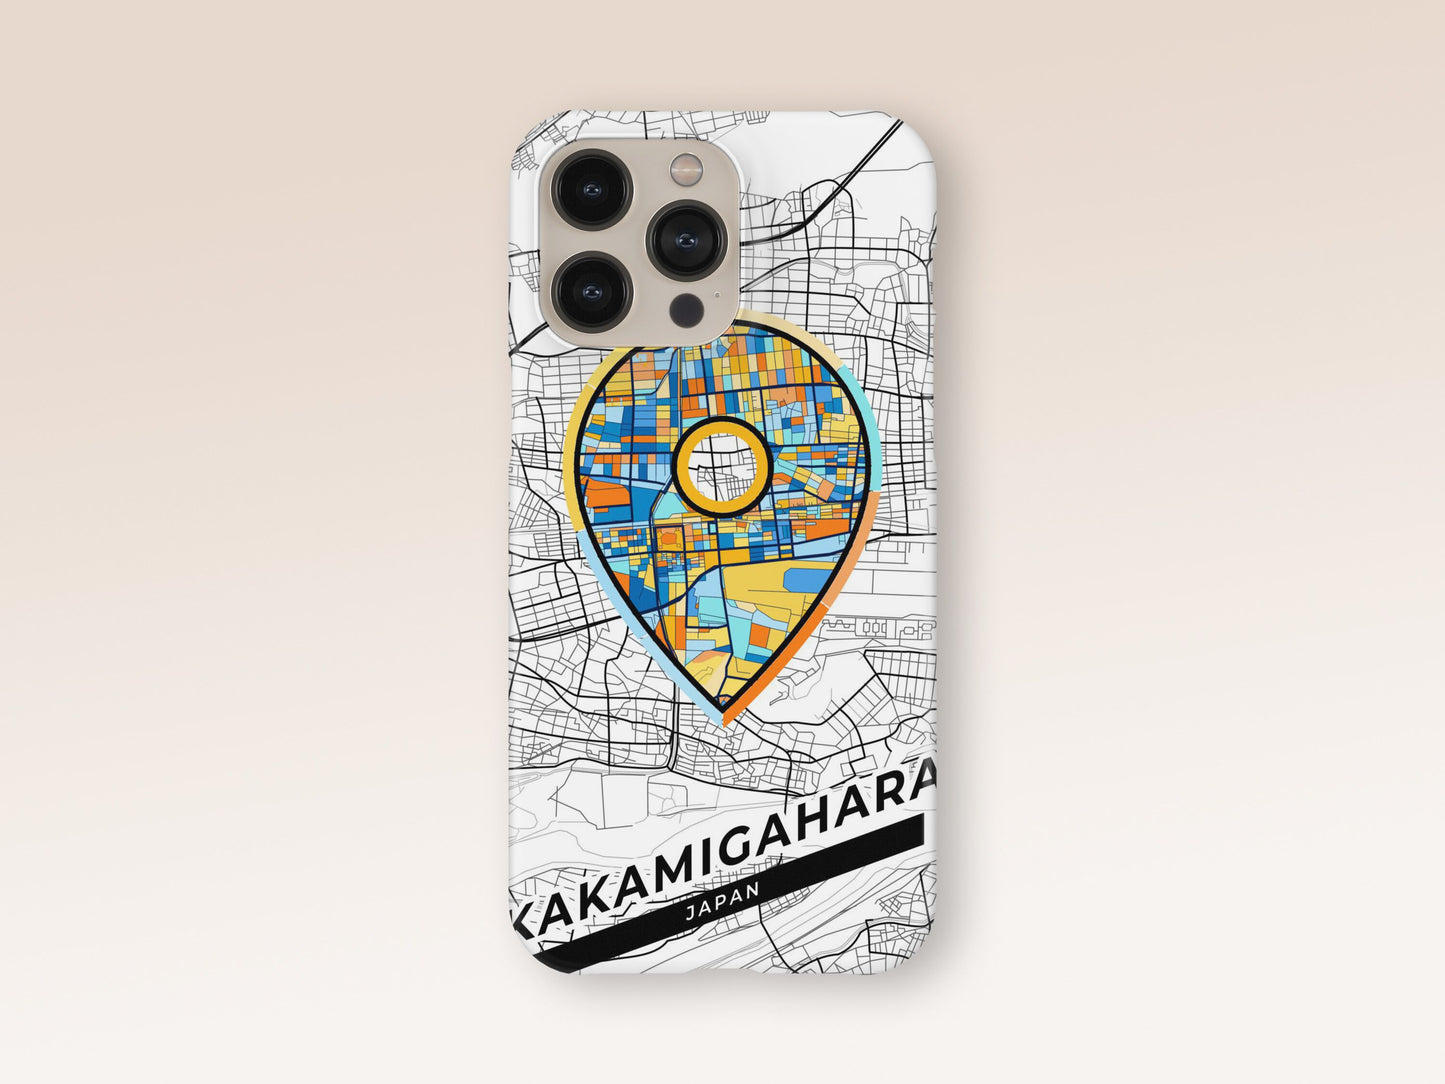 Kakamigahara Japan slim phone case with colorful icon. Birthday, wedding or housewarming gift. Couple match cases. 1